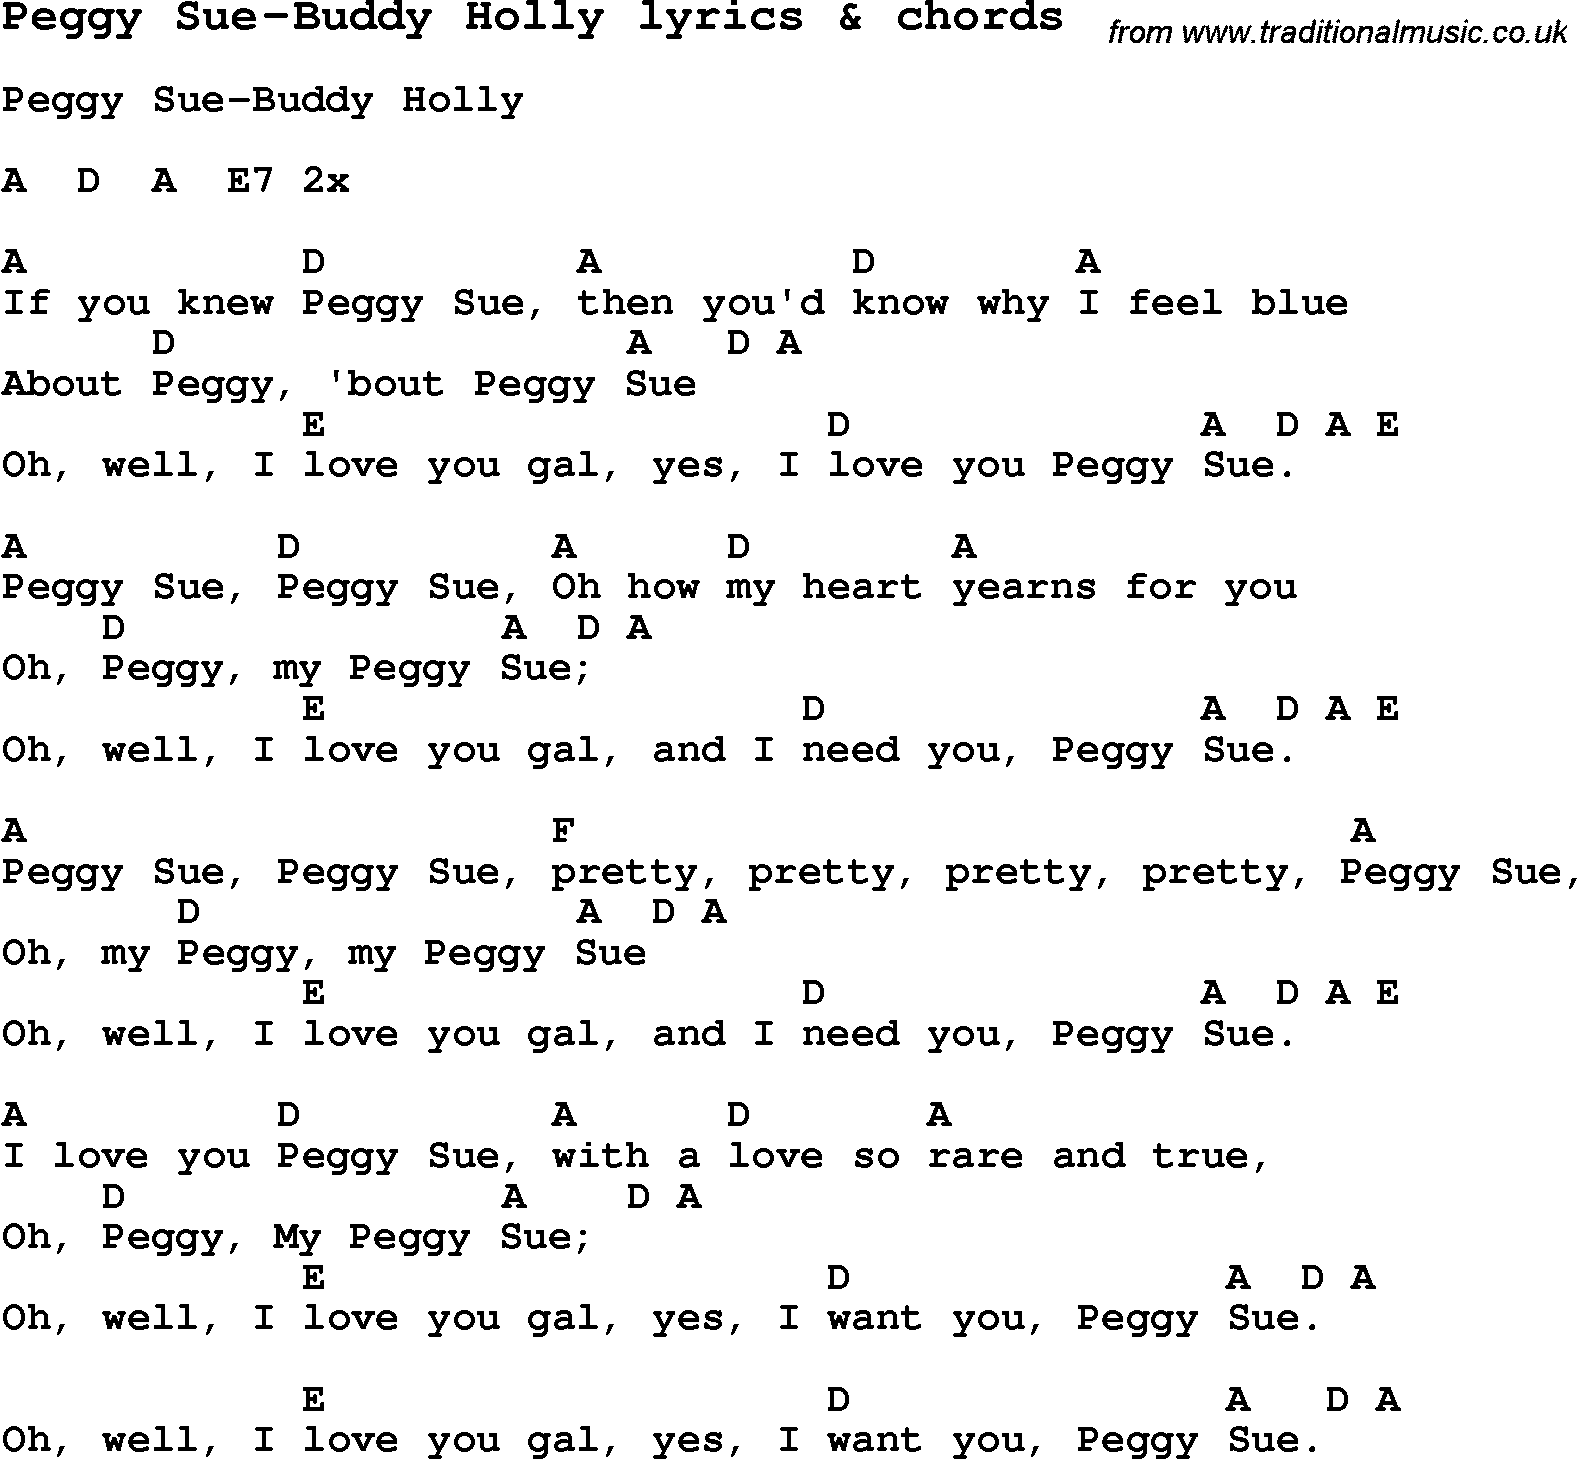 Love Song Lyrics for: Peggy Sue-Buddy Holly with chords for Ukulele, Guitar Banjo etc.